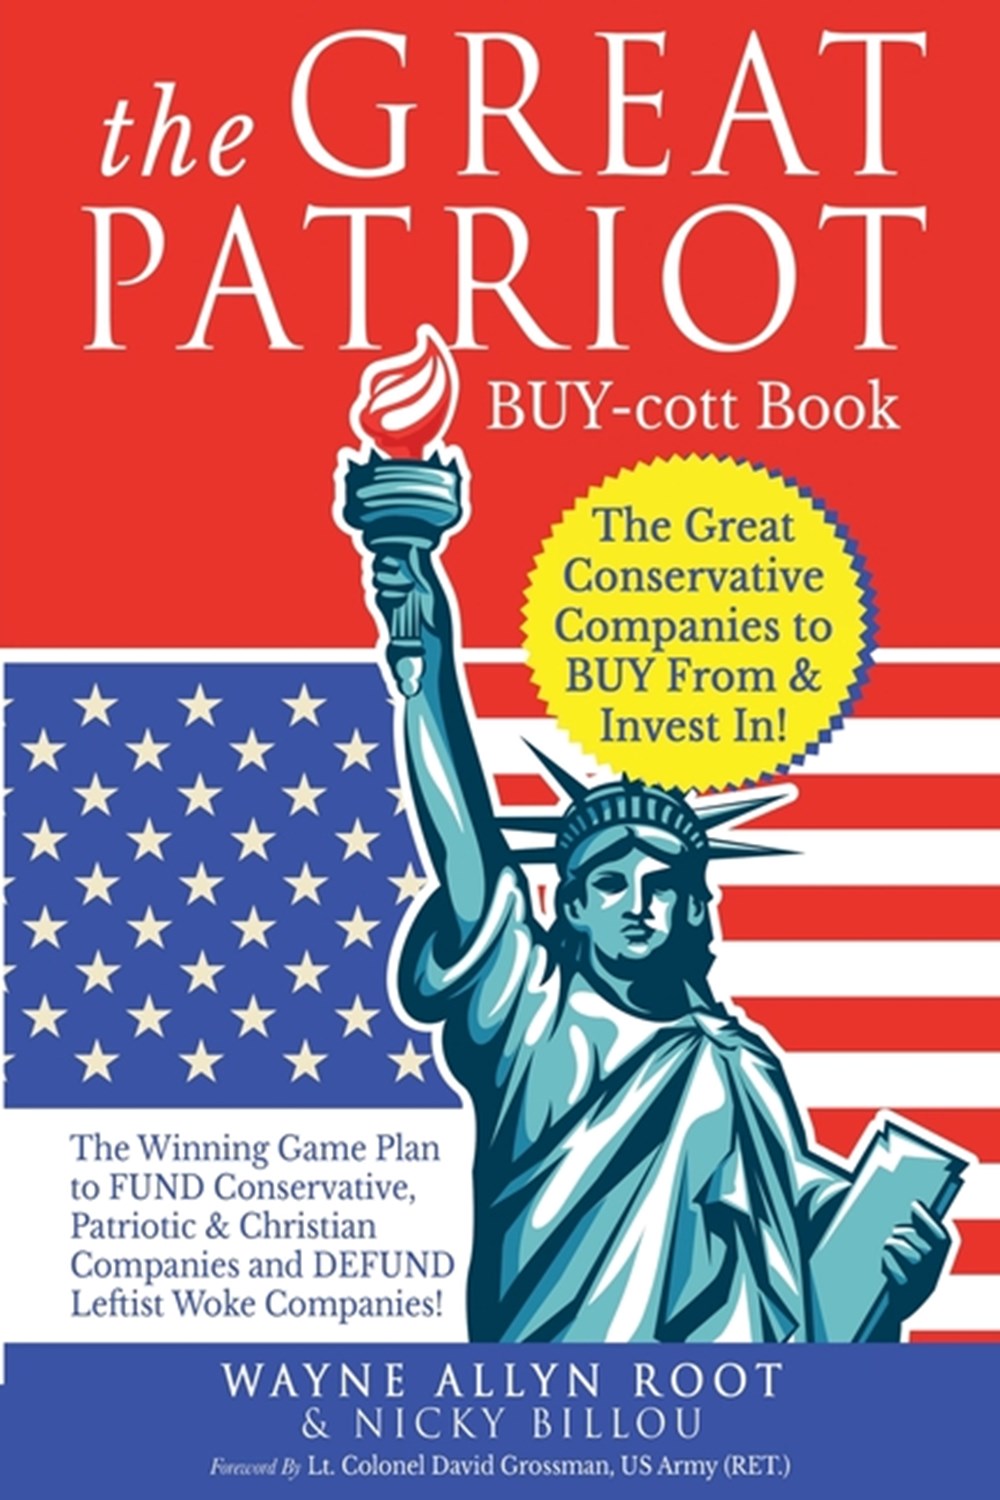 Great Patriot BUY-cott Book: The Great Conservative Companies to BUY From & Invest In!